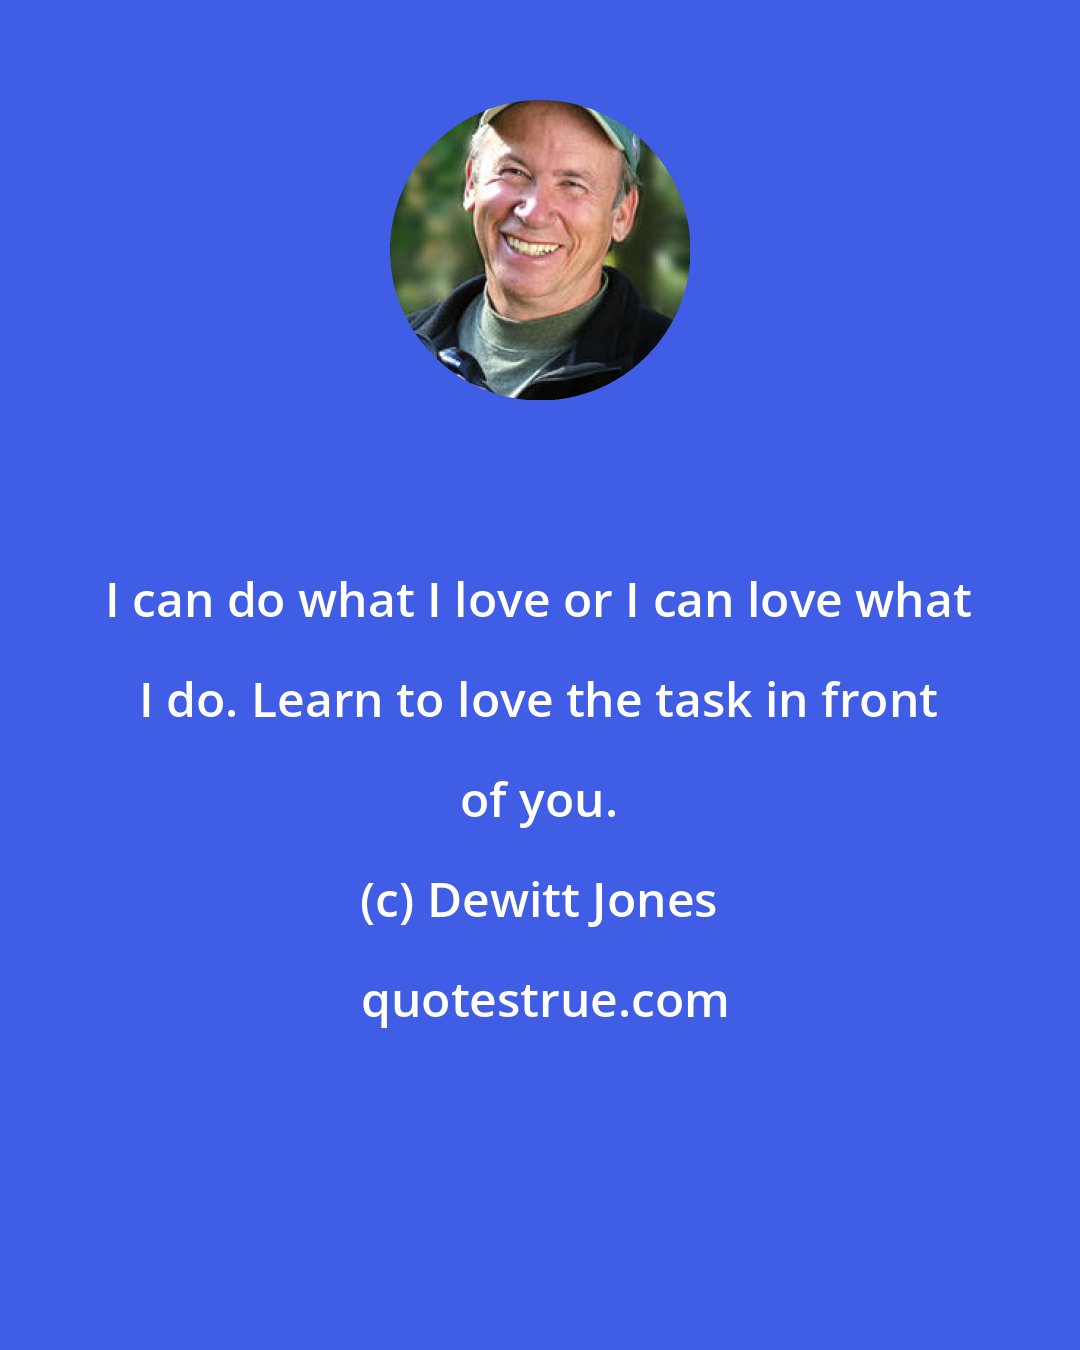 Dewitt Jones: I can do what I love or I can love what I do. Learn to love the task in front of you.